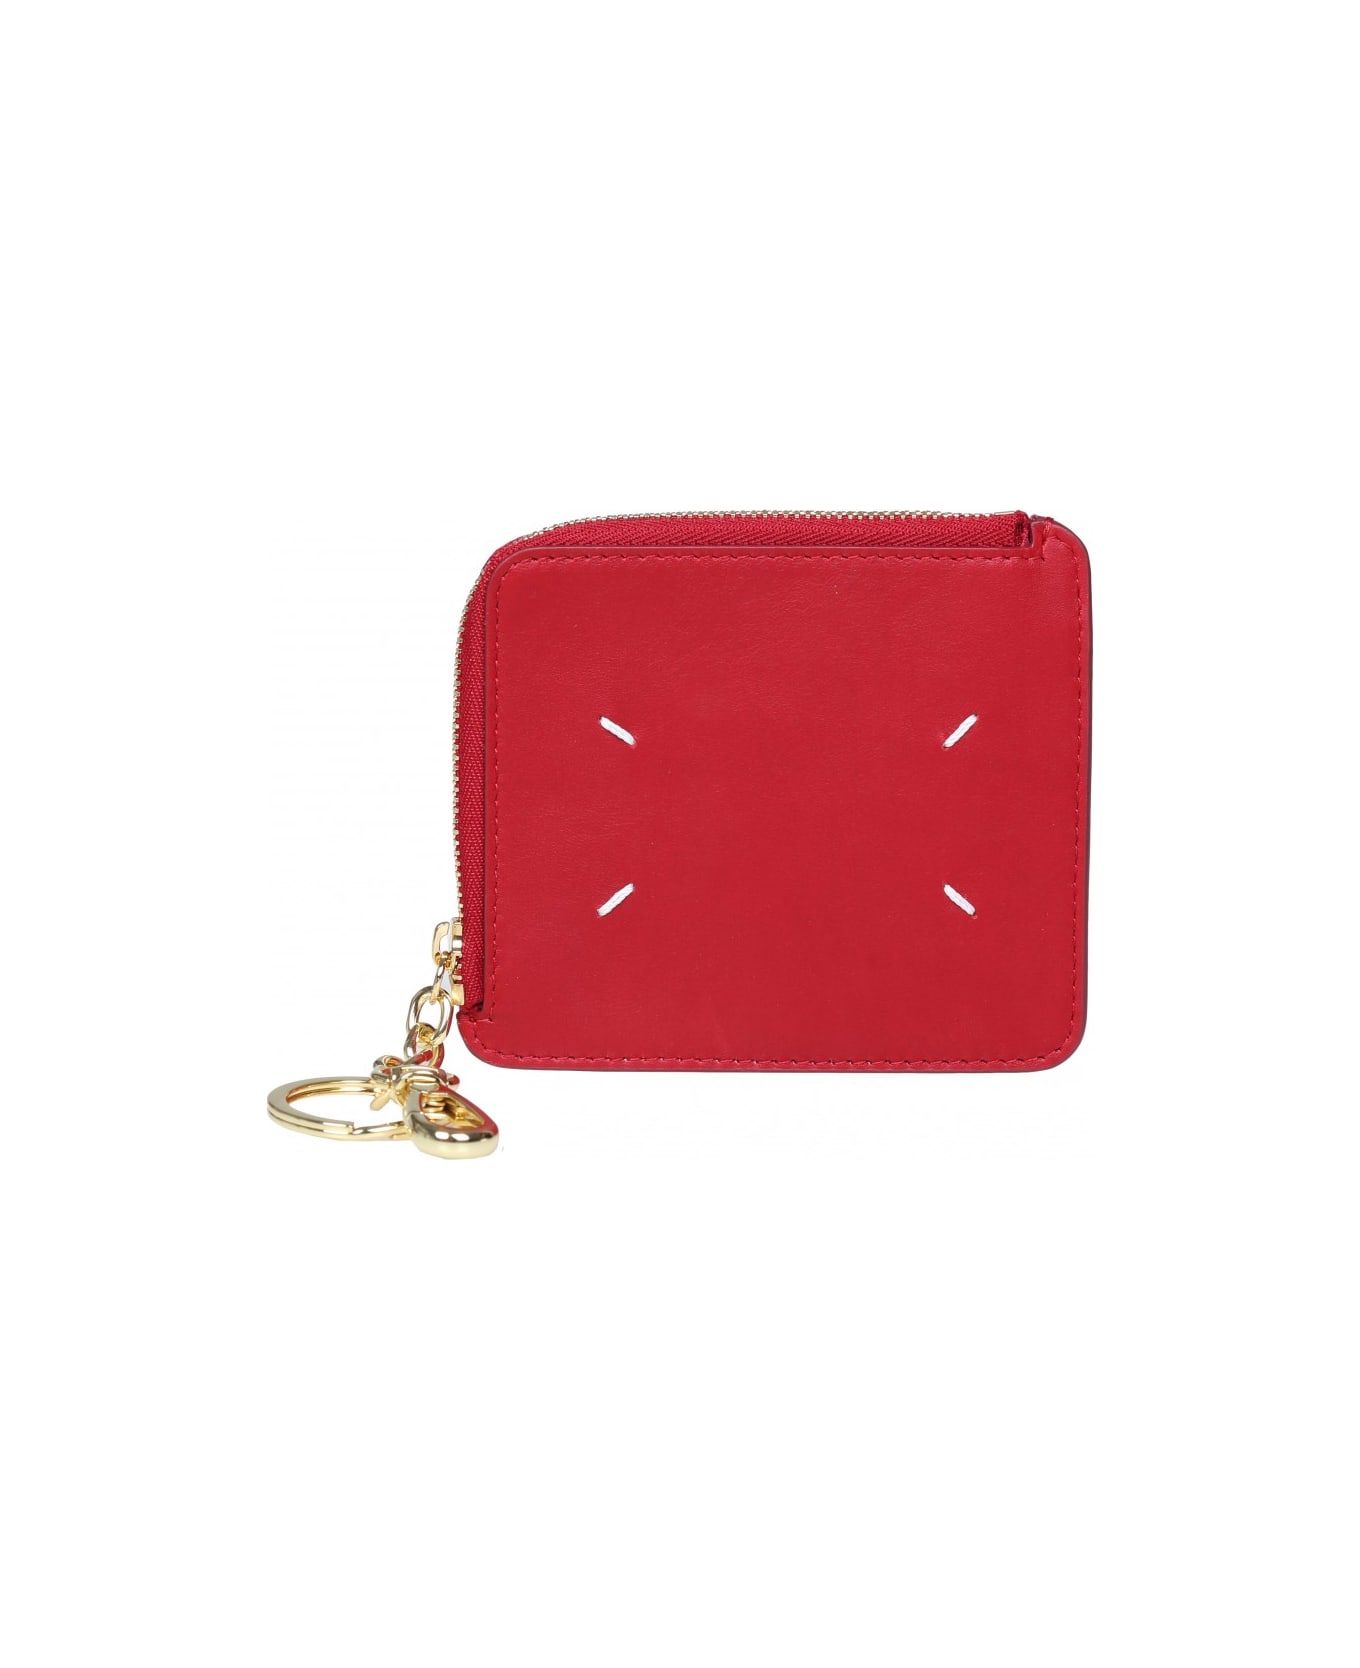 Maison Margiela Leather Key Chain Wallet Color Red - Red